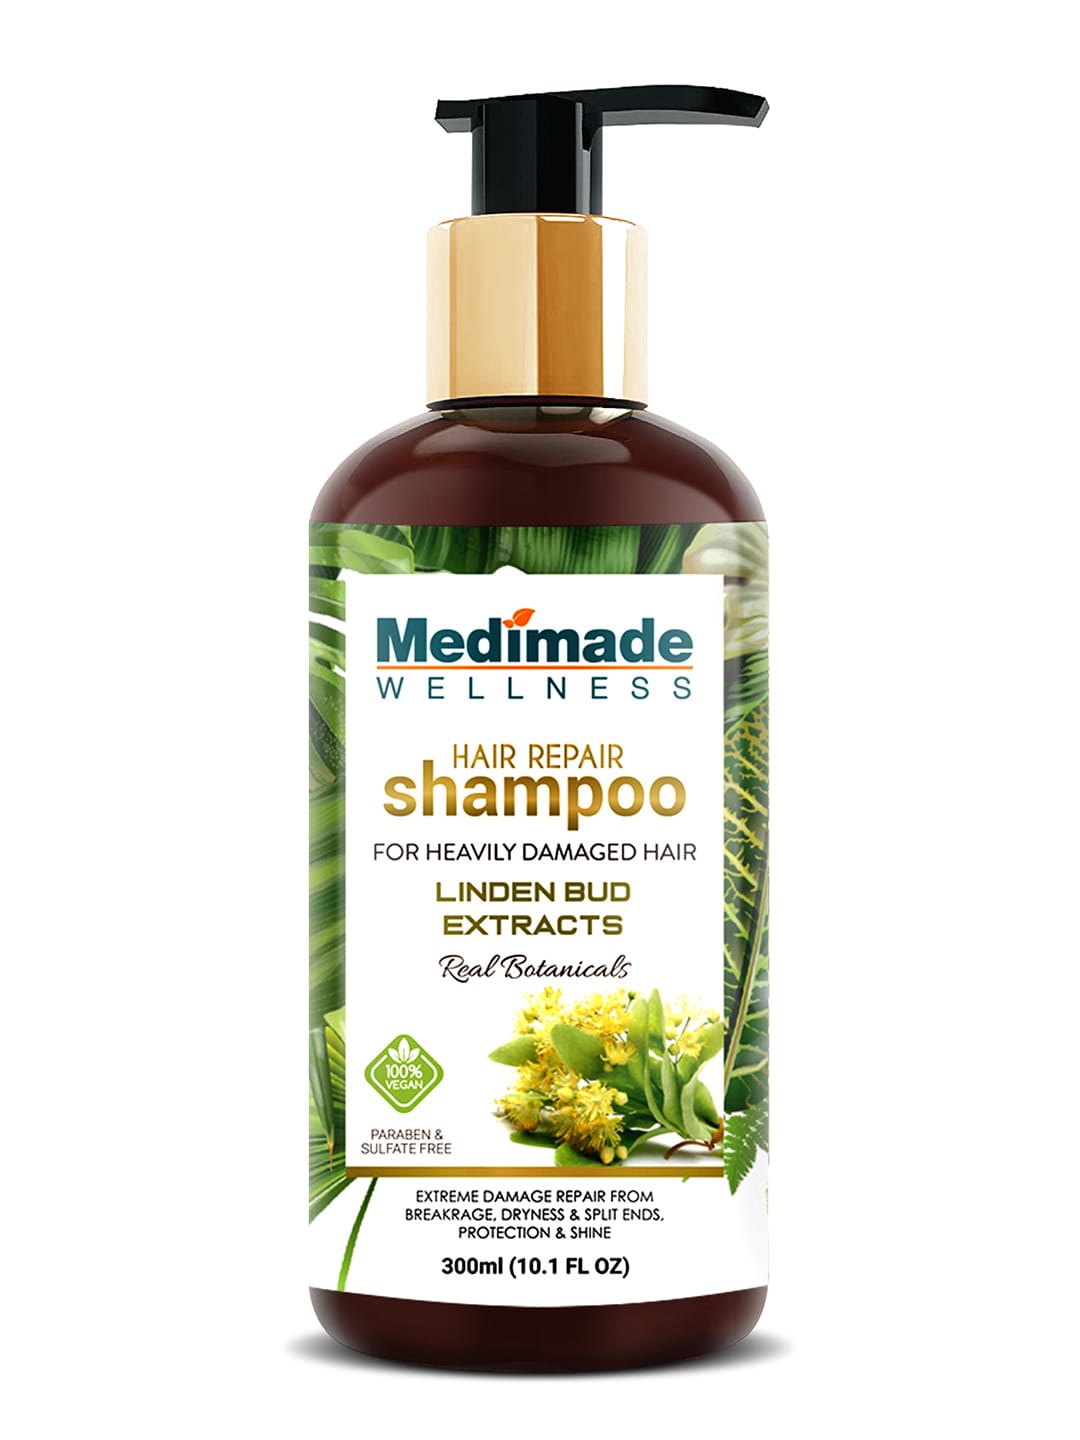 Medimade Hair Repair Shampoo with Linden Bud Extracts - 300 ml Price in India